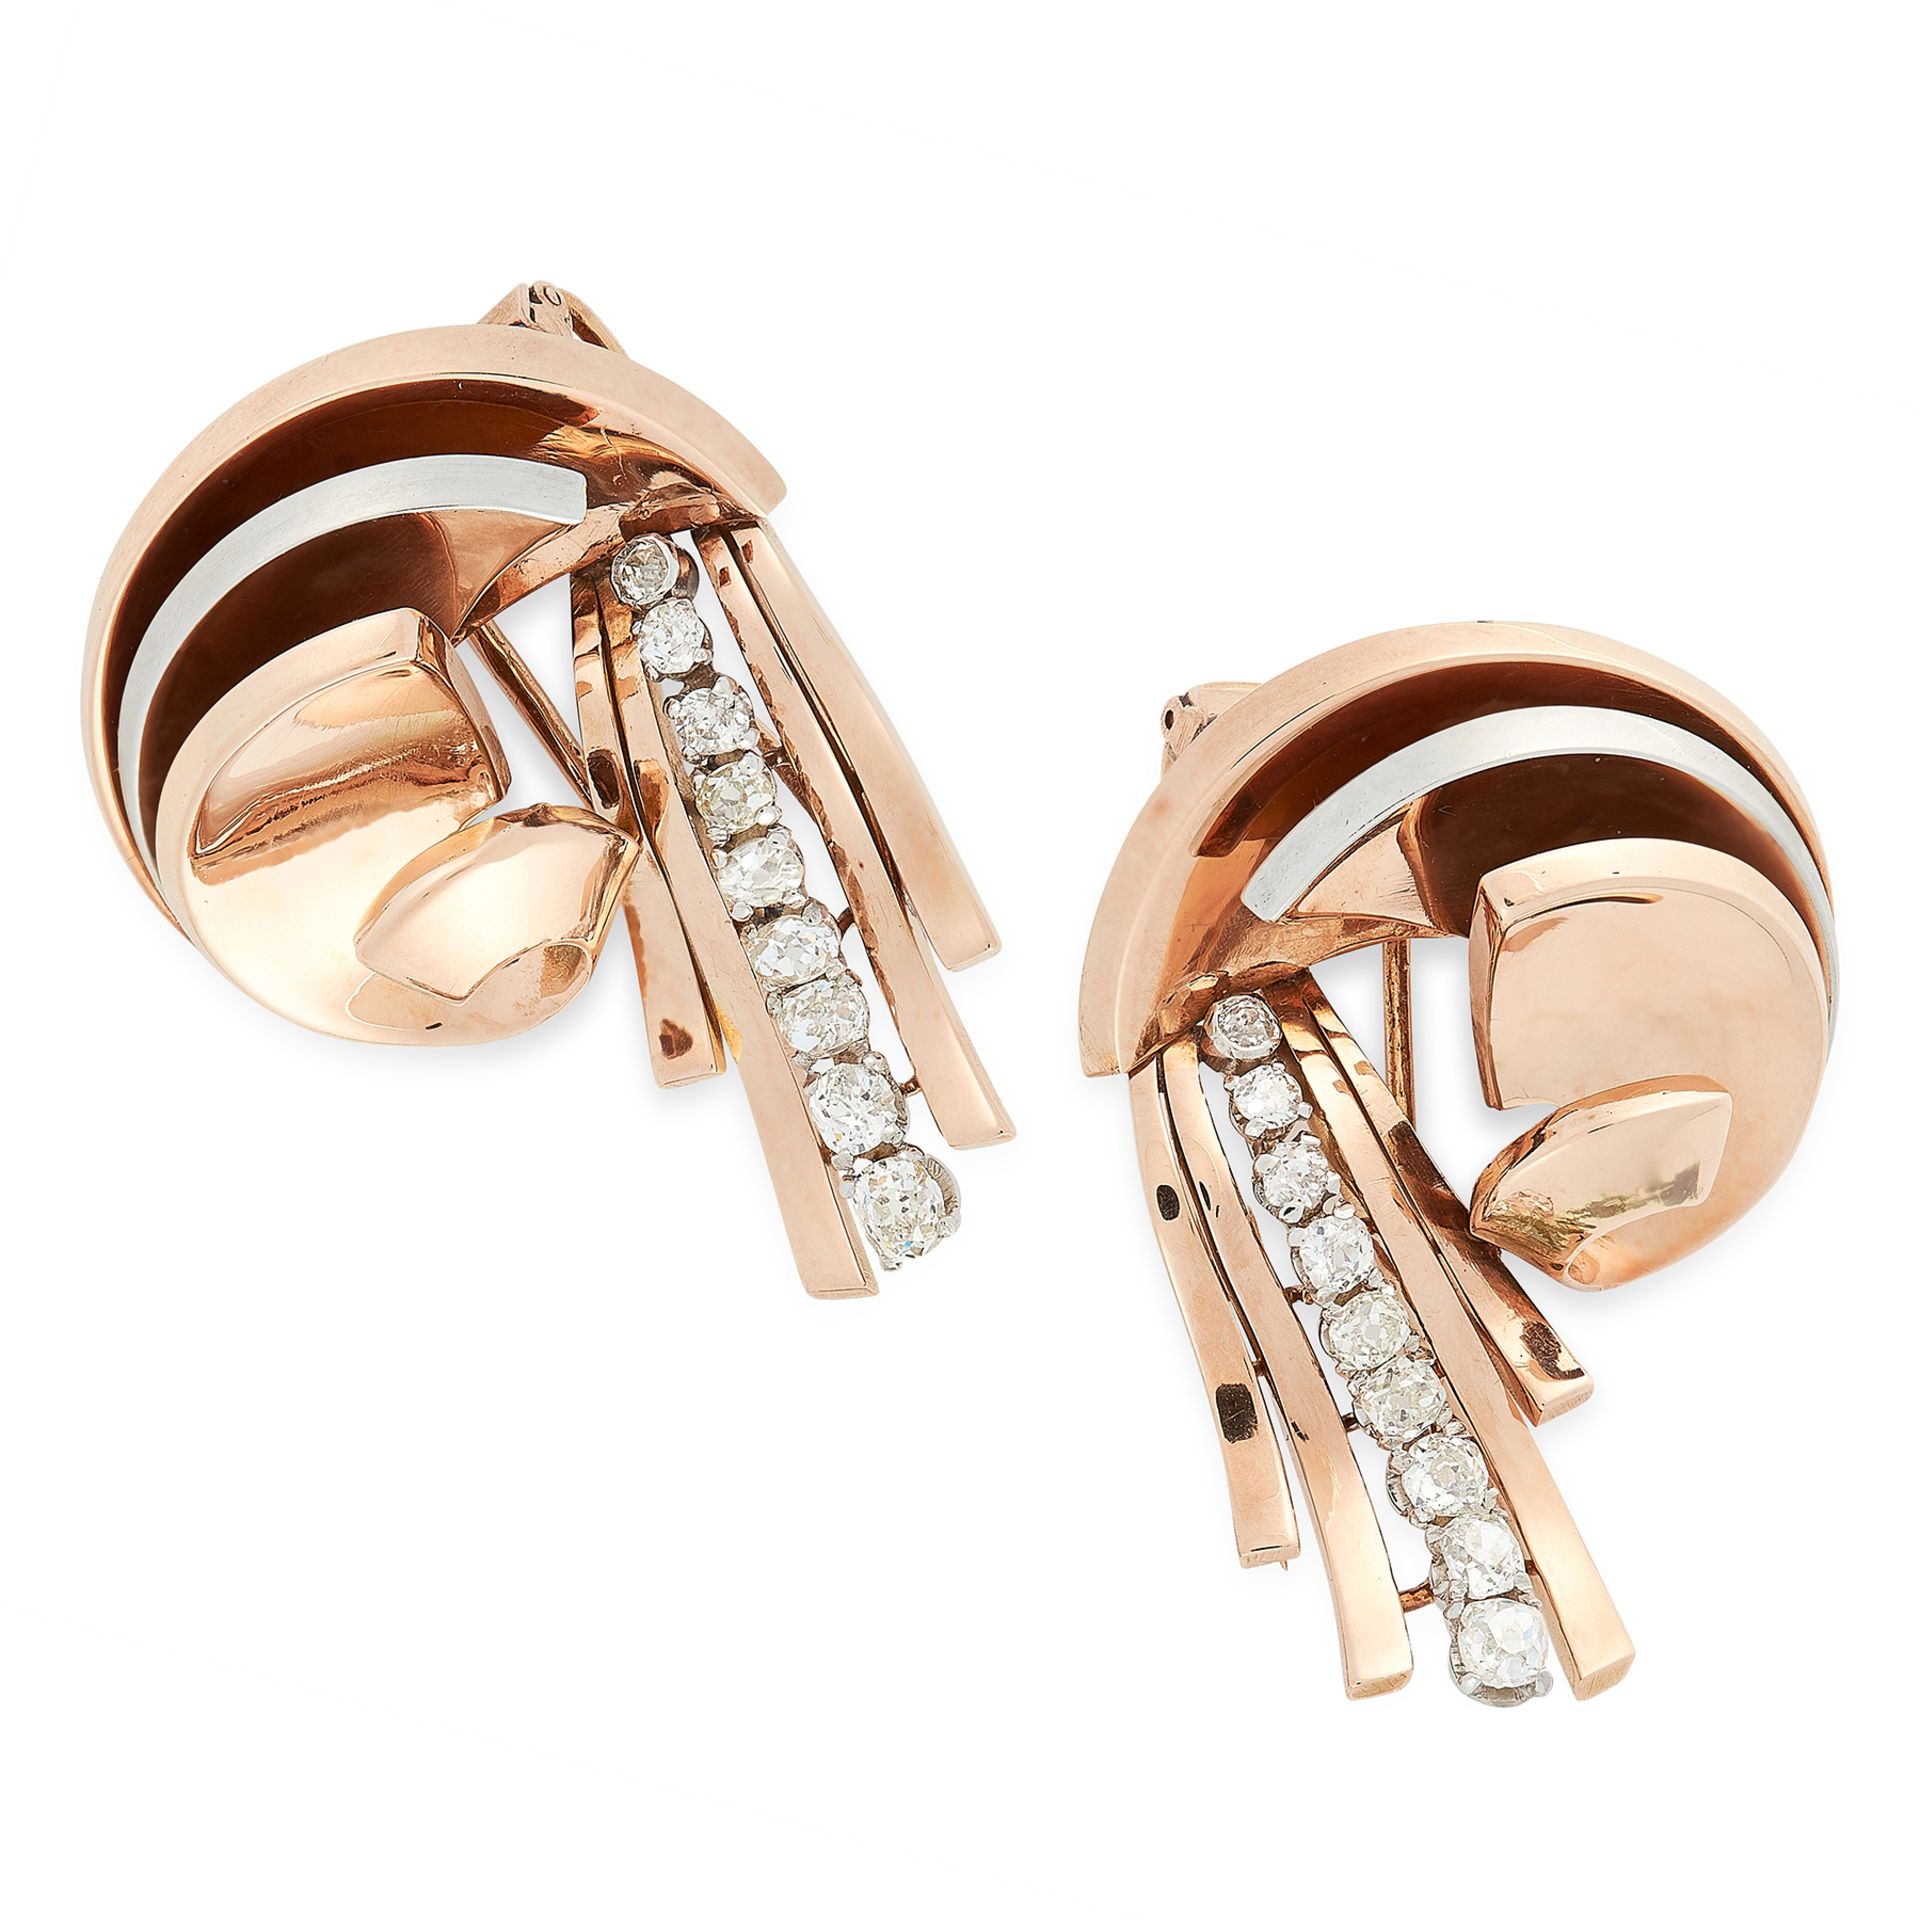 A PAIR OF DIAMOND CLIP BROOCHES CIRCA 1940 in rose gold, of layered scrolling design, each set